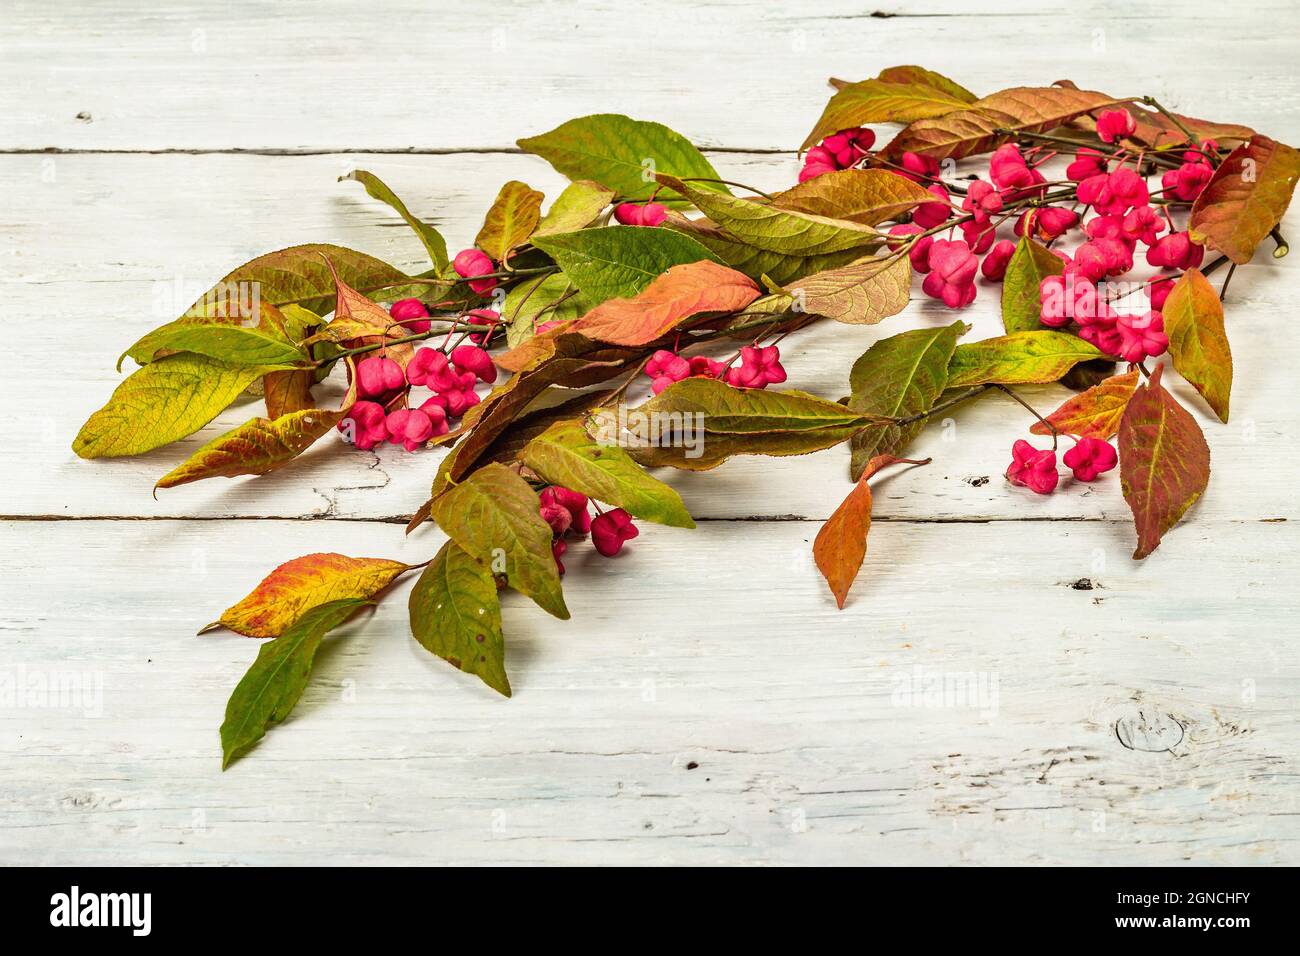 Wreath from Euonymus europaeus a white wooden background. Autumn frame decorative composition with toxic fruits, orange seeds, and fall colorful leave Stock Photo